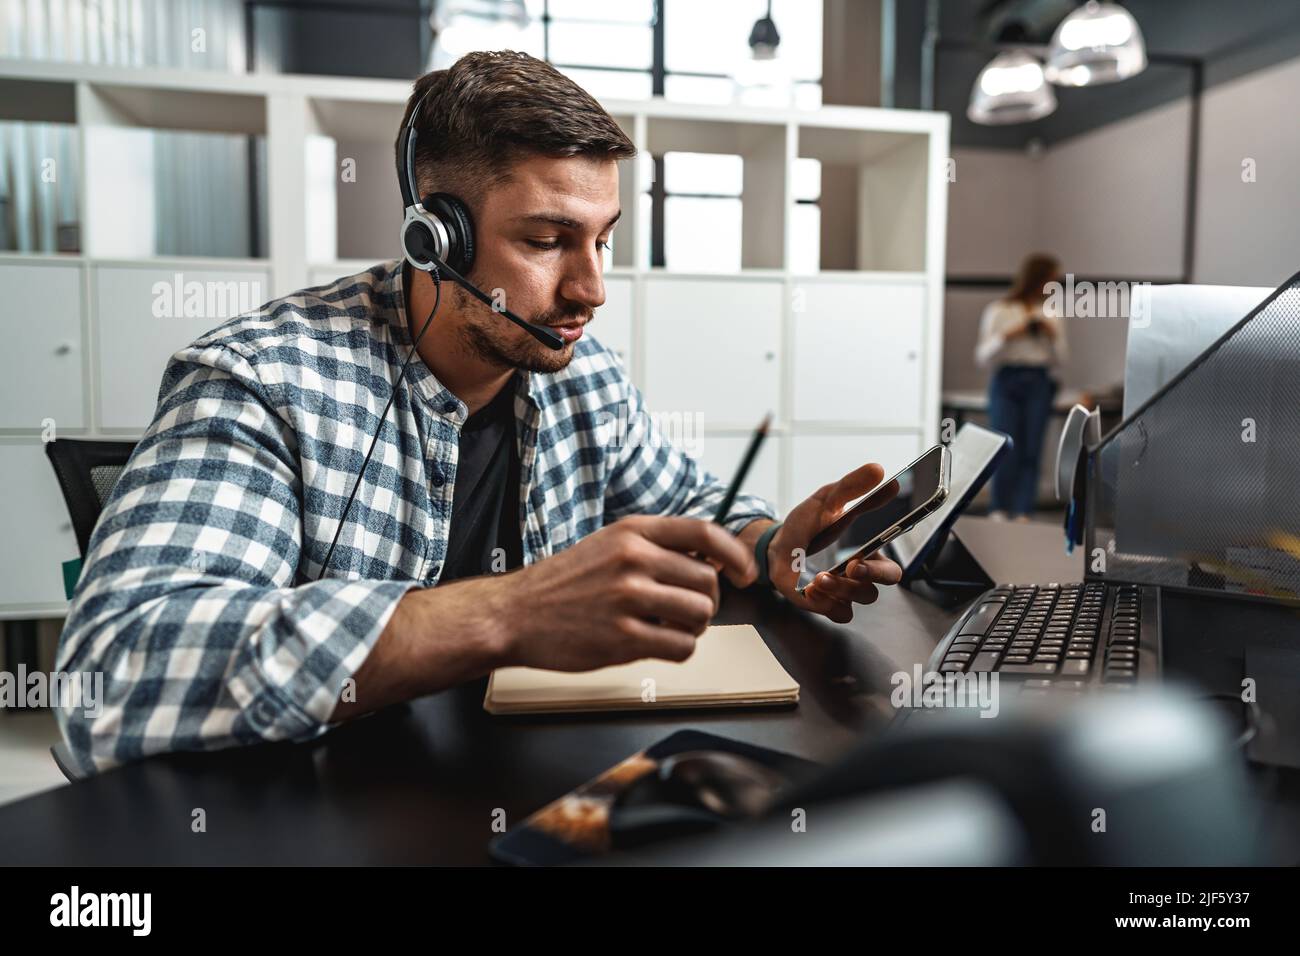 Customer service support operator man with headphones and microphone talking to client in call center Stock Photo